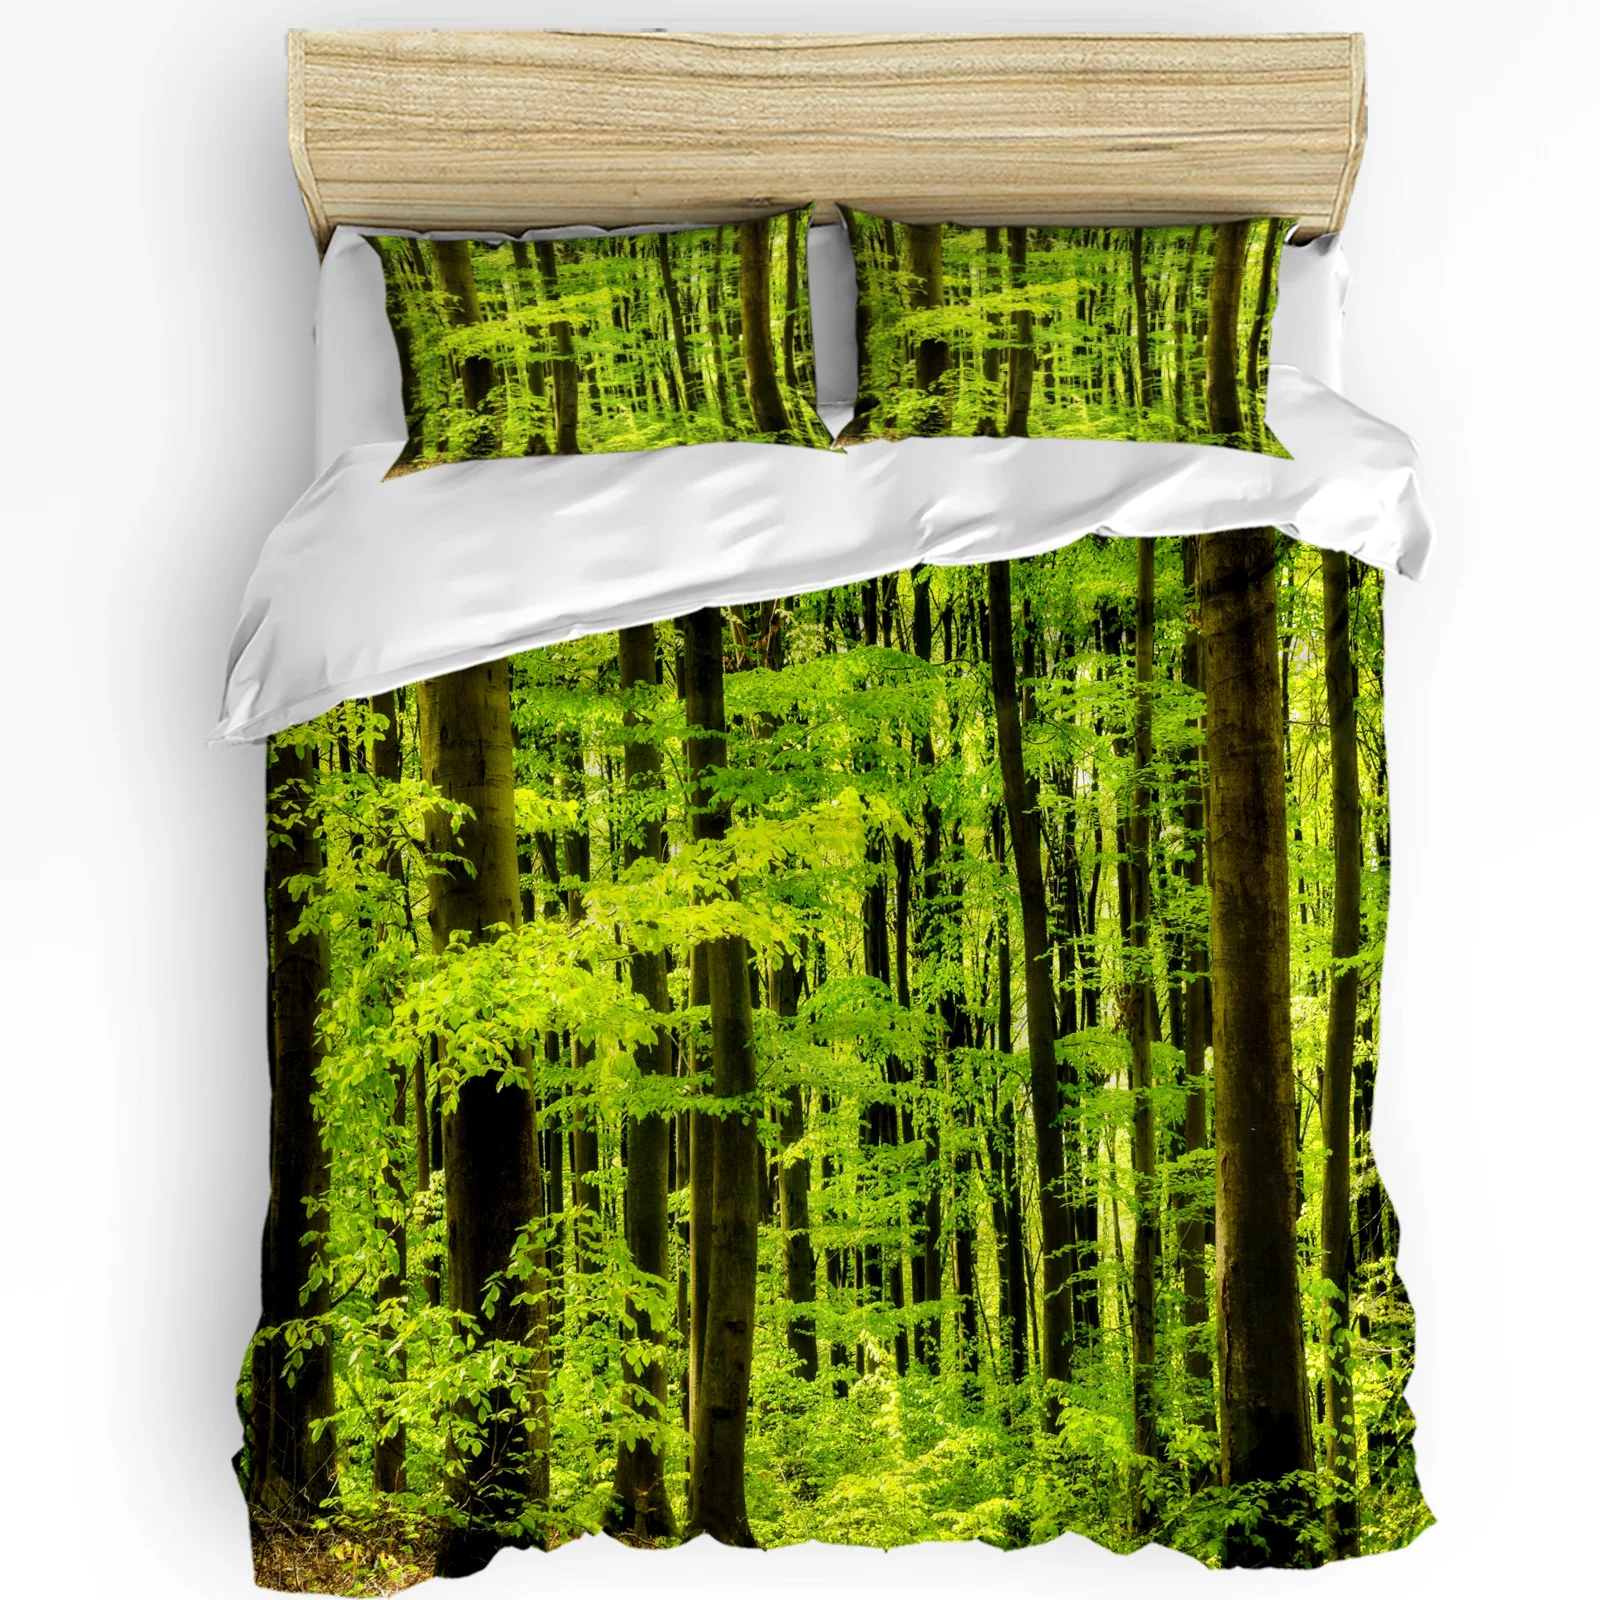 

Forest Green Trees Leaves Plants Natural Scenery 3pcs Bedding Set For Double Bed Home Textile Duvet Cover Quilt Cover Pillowcase